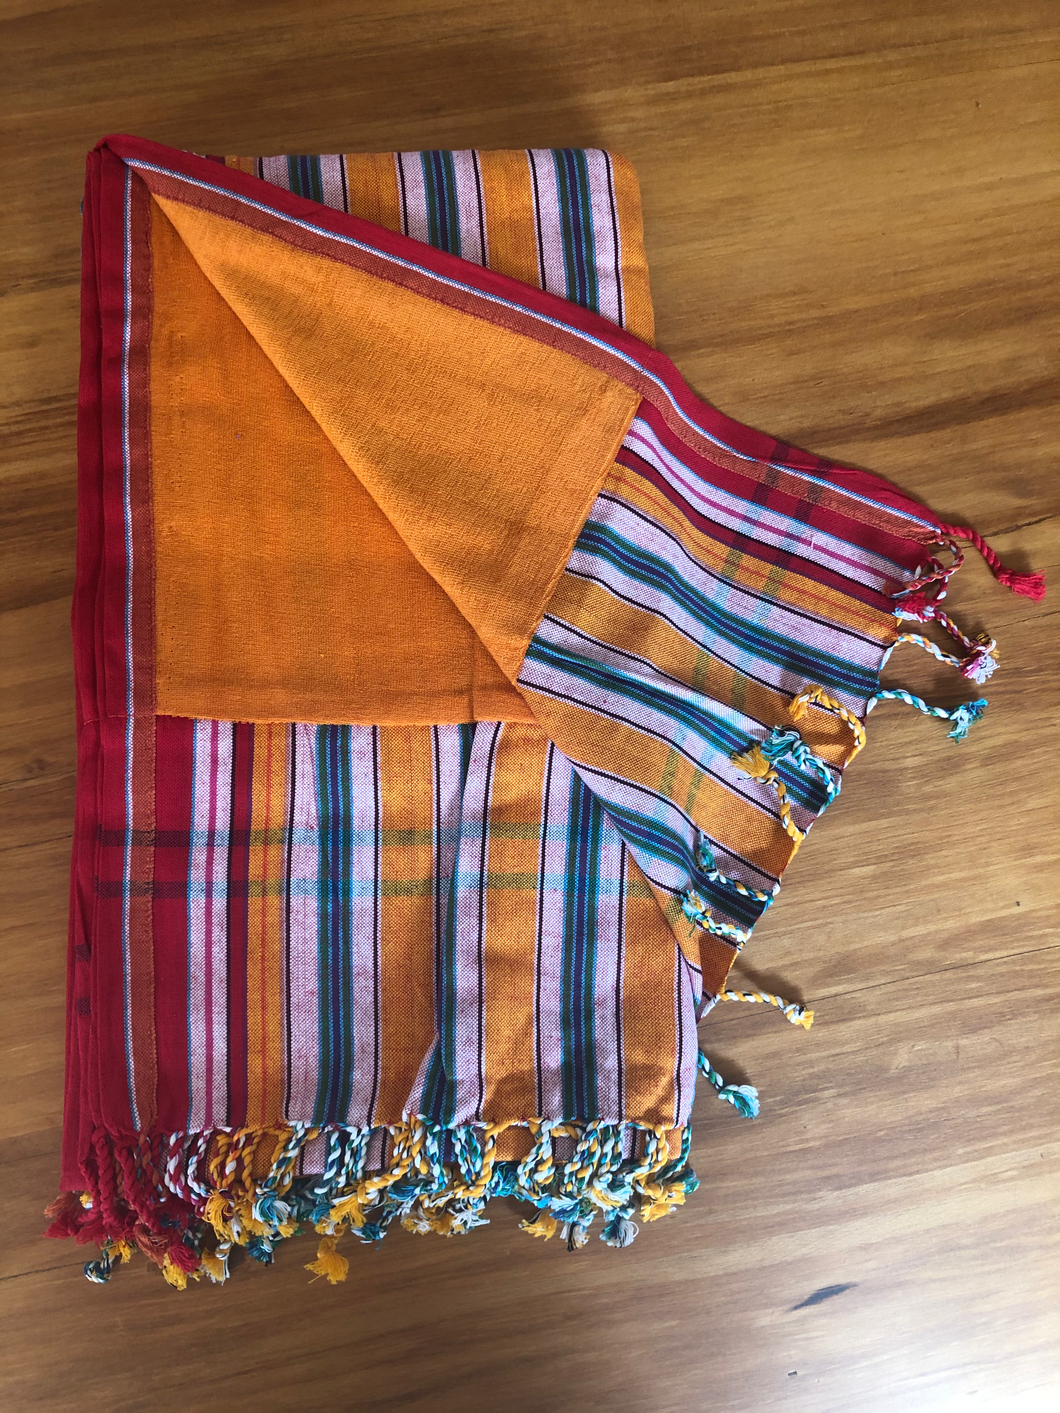 Kikoy Towel: Orange/Teal/White Stripes and Red edge with Orange terry lining - Salt and Reverie